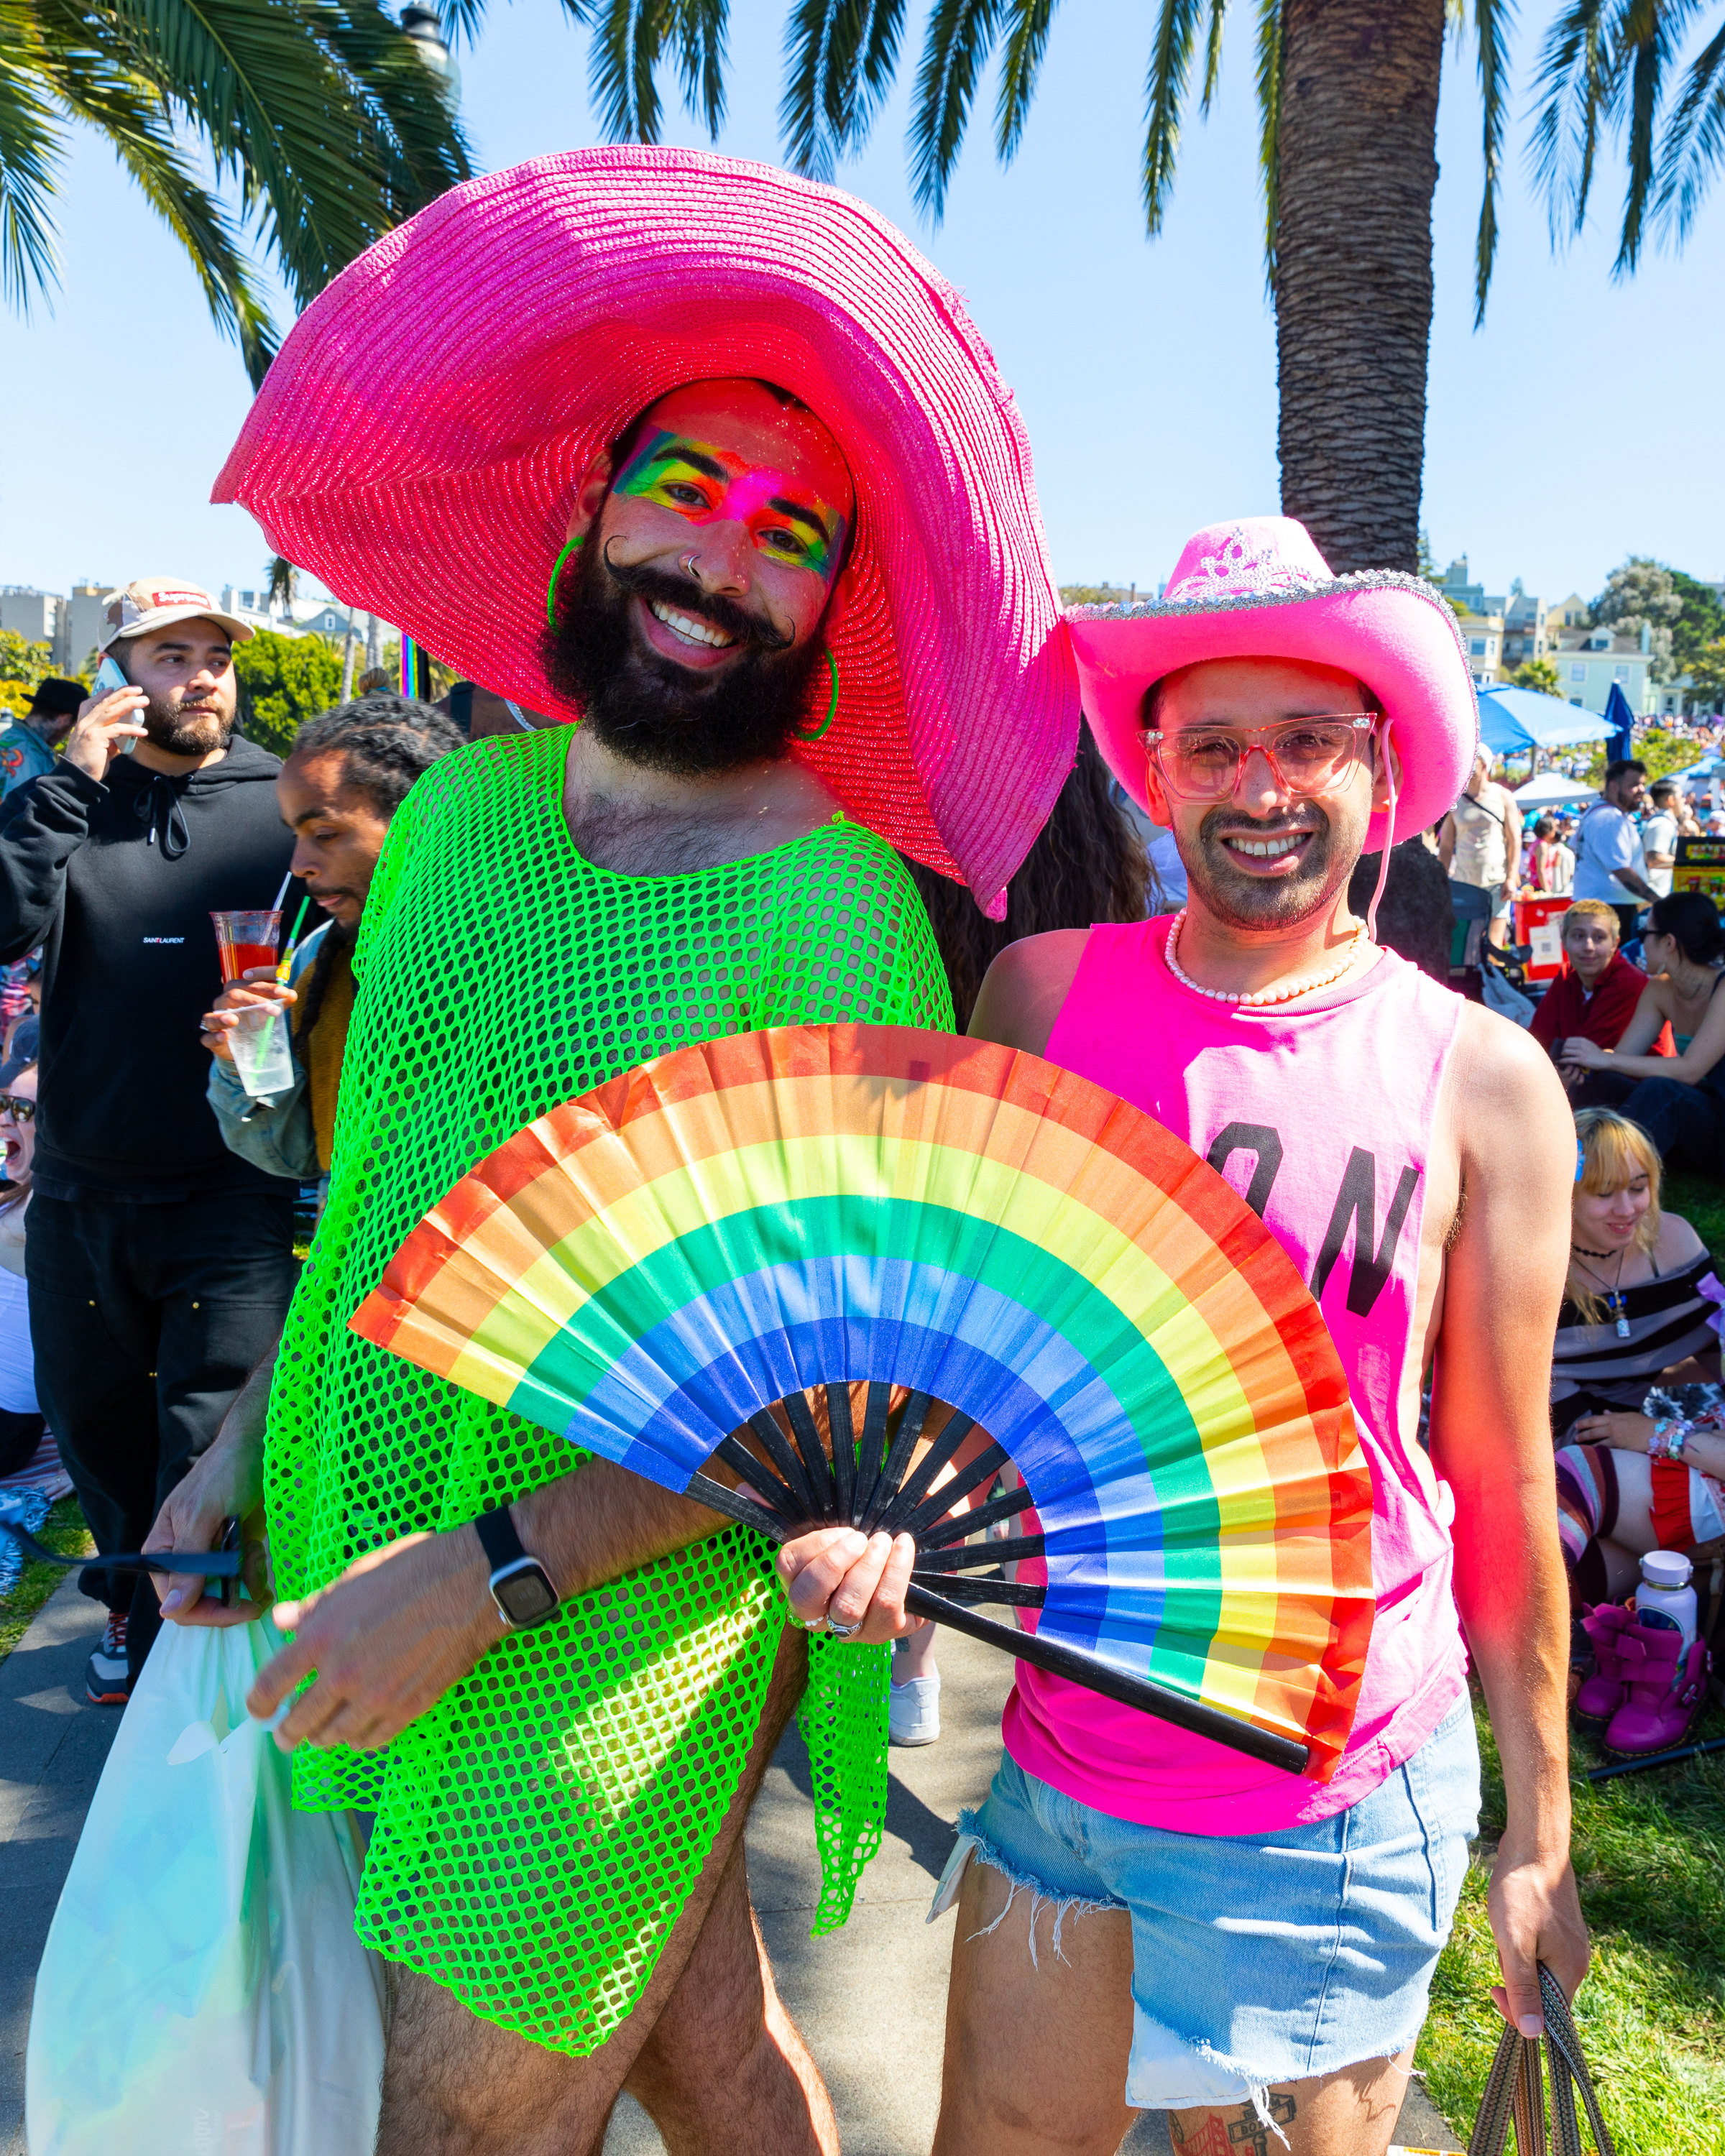 Two smiling individuals are dressed colorfully at an outdoor event beside palm trees; one in a green mesh outfit with a pink hat, and the other in pink attire and a cowboy hat.